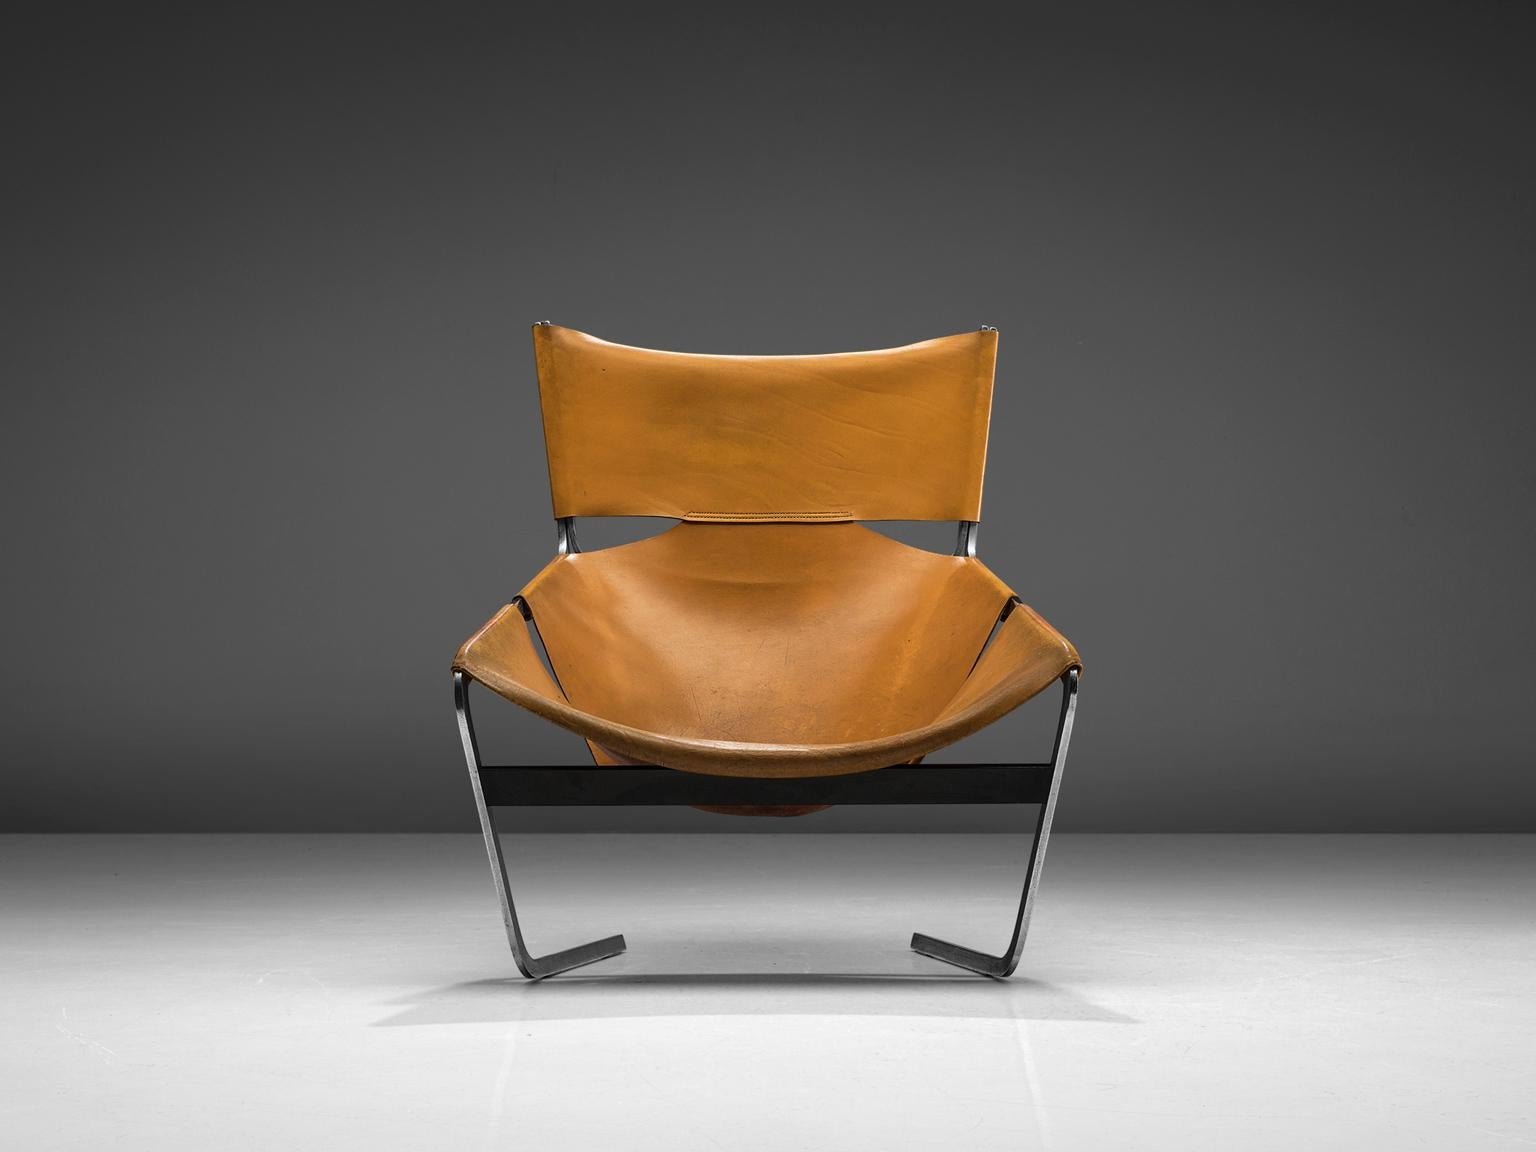 Pierre Paulin for Artifort, F-444 easy chair, metal and cognac leather, the Netherlands, circa 1962.

This cognac leather F-444 chair is designed by Pierre Paulin for Artifort in 1962. This chair shows sharp lines and an angled open seat that